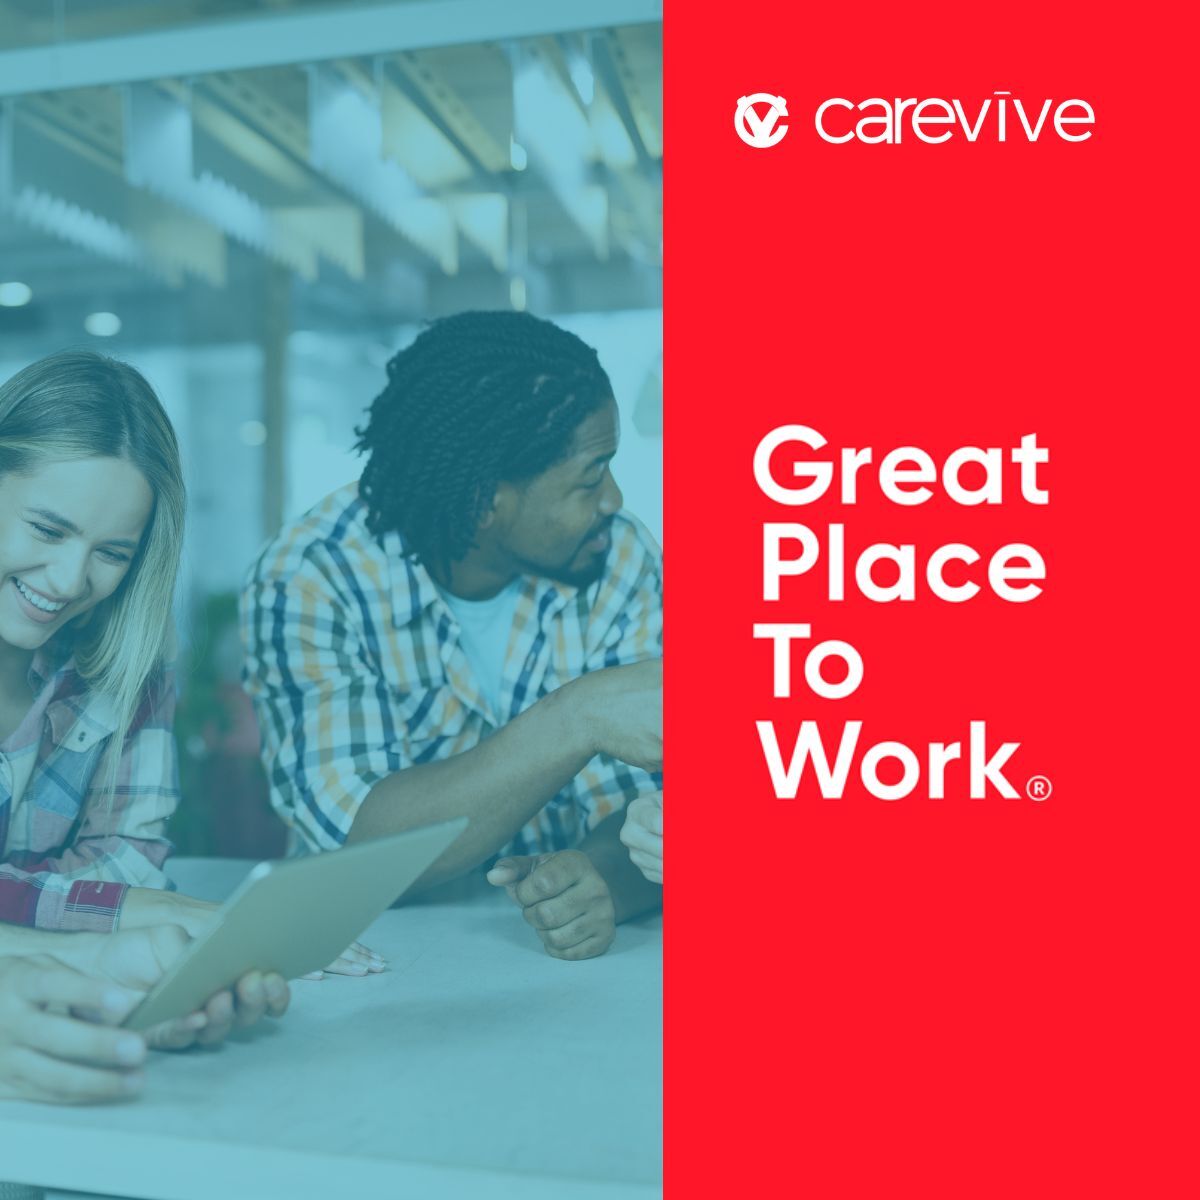 Carevive recently partnered with Great Place to Work®, the global authority on workplace culture, and we’re proud to announce that we are Great Place to Work-Certified!